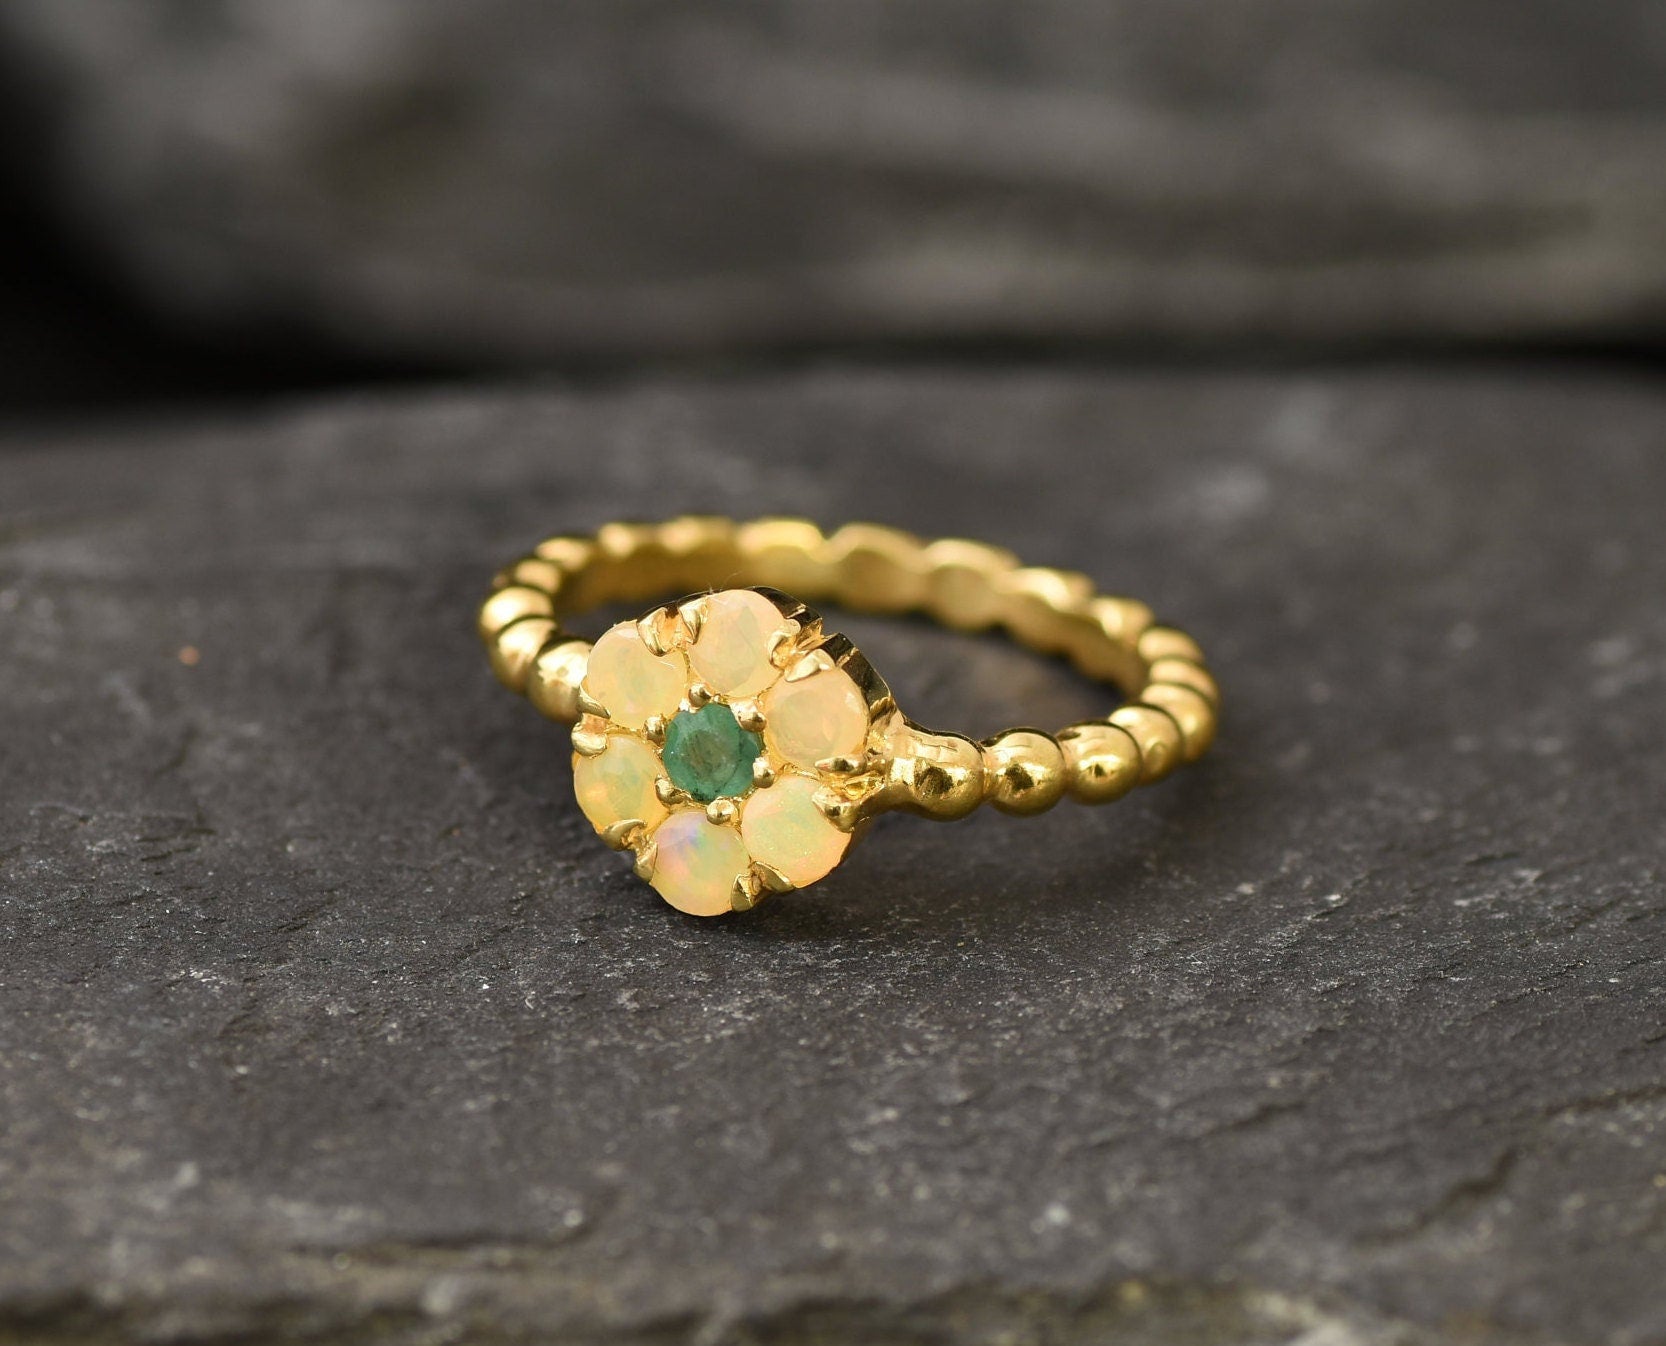 Gold Flower Ring, Fire Opal Ring, Gold Plated Ring, Daisy Ring, Natural Opal, October Birthstone, Dainty Ring, Stackable Ring, Vermeil Ring